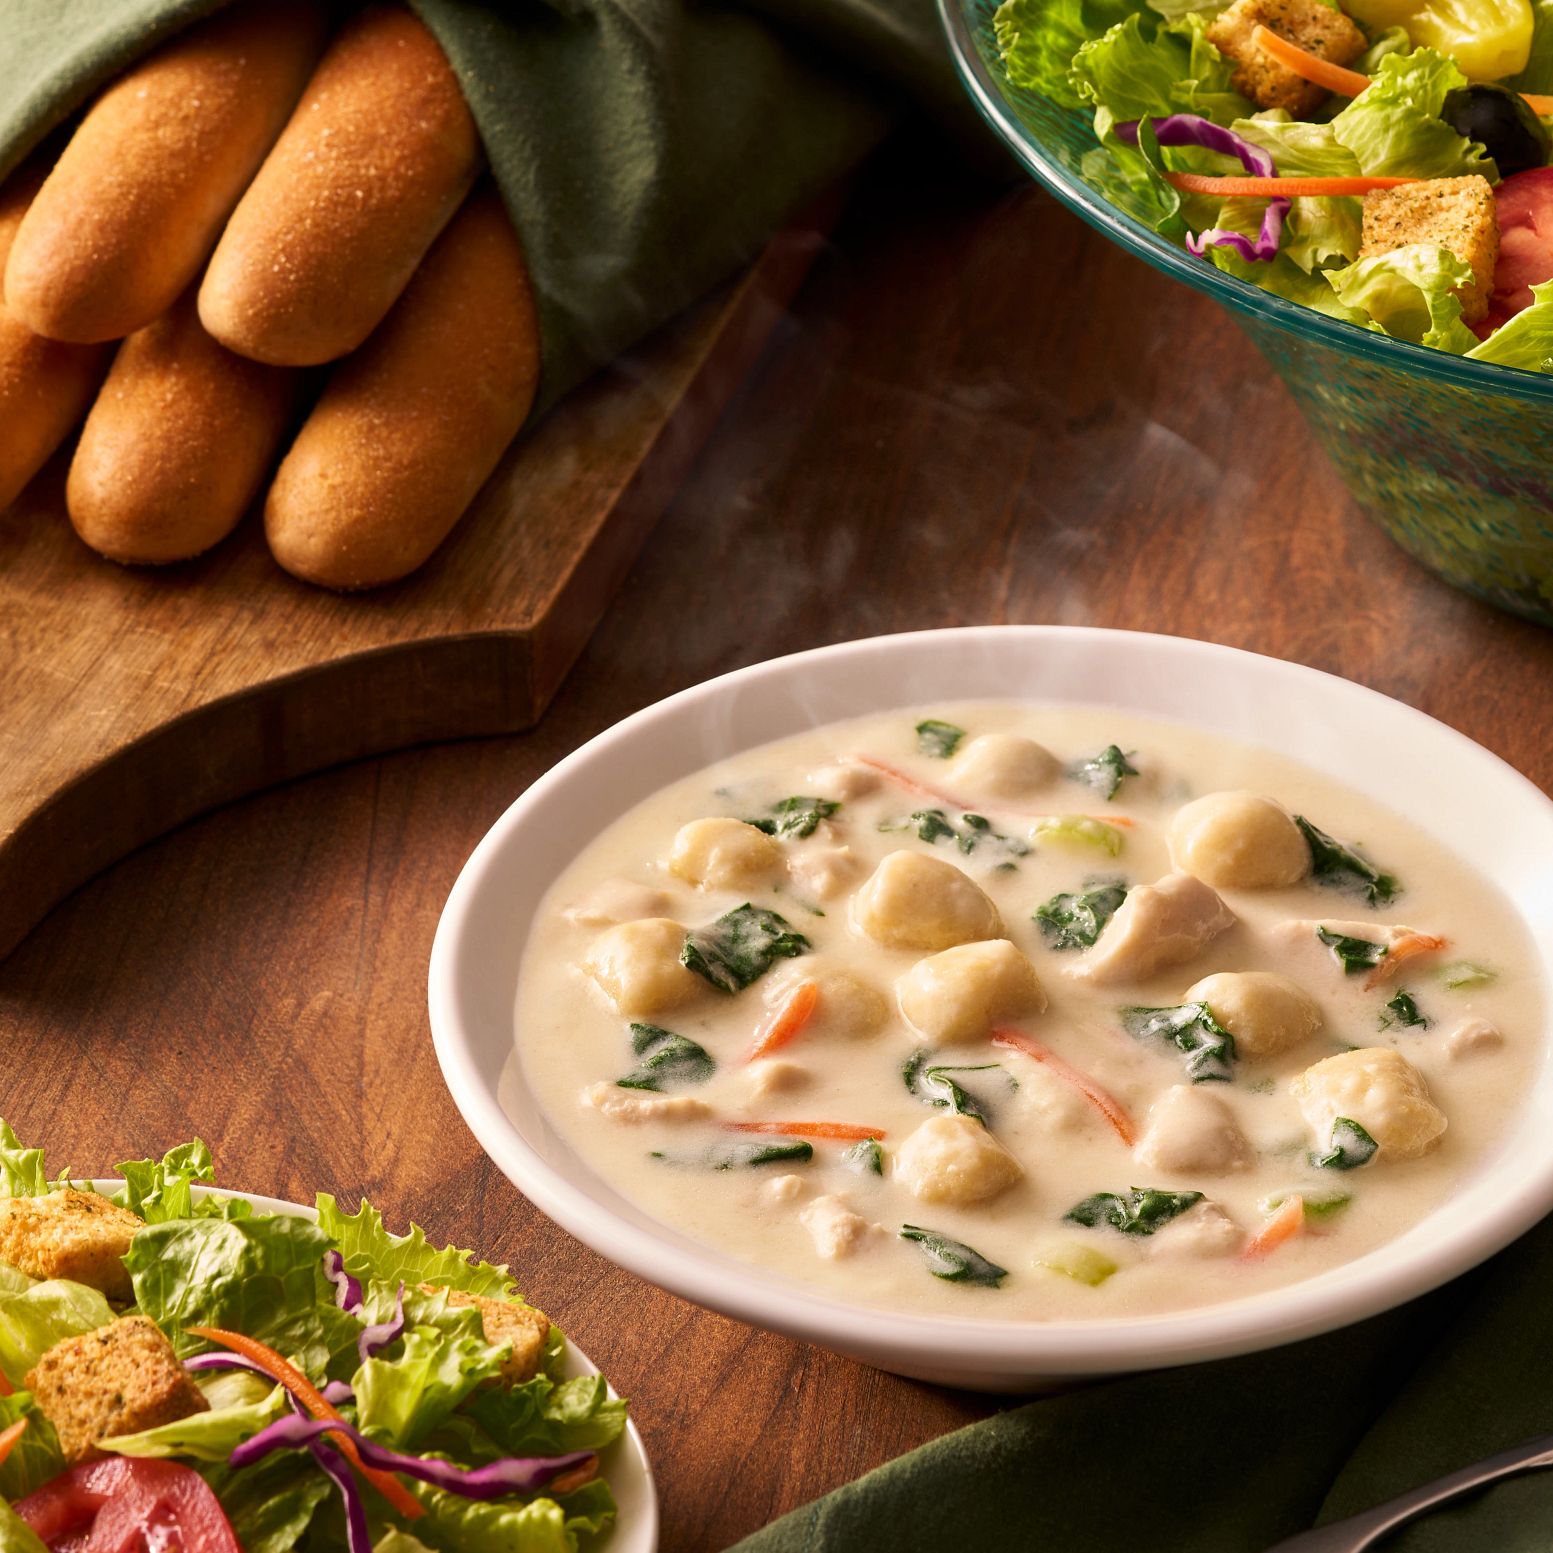 Chicken & Gnocchi: A creamy soup made with roasted chicken, Italian dumplings and spinach. Olive Garden Italian Restaurant Laguna Hills (949)583-1020